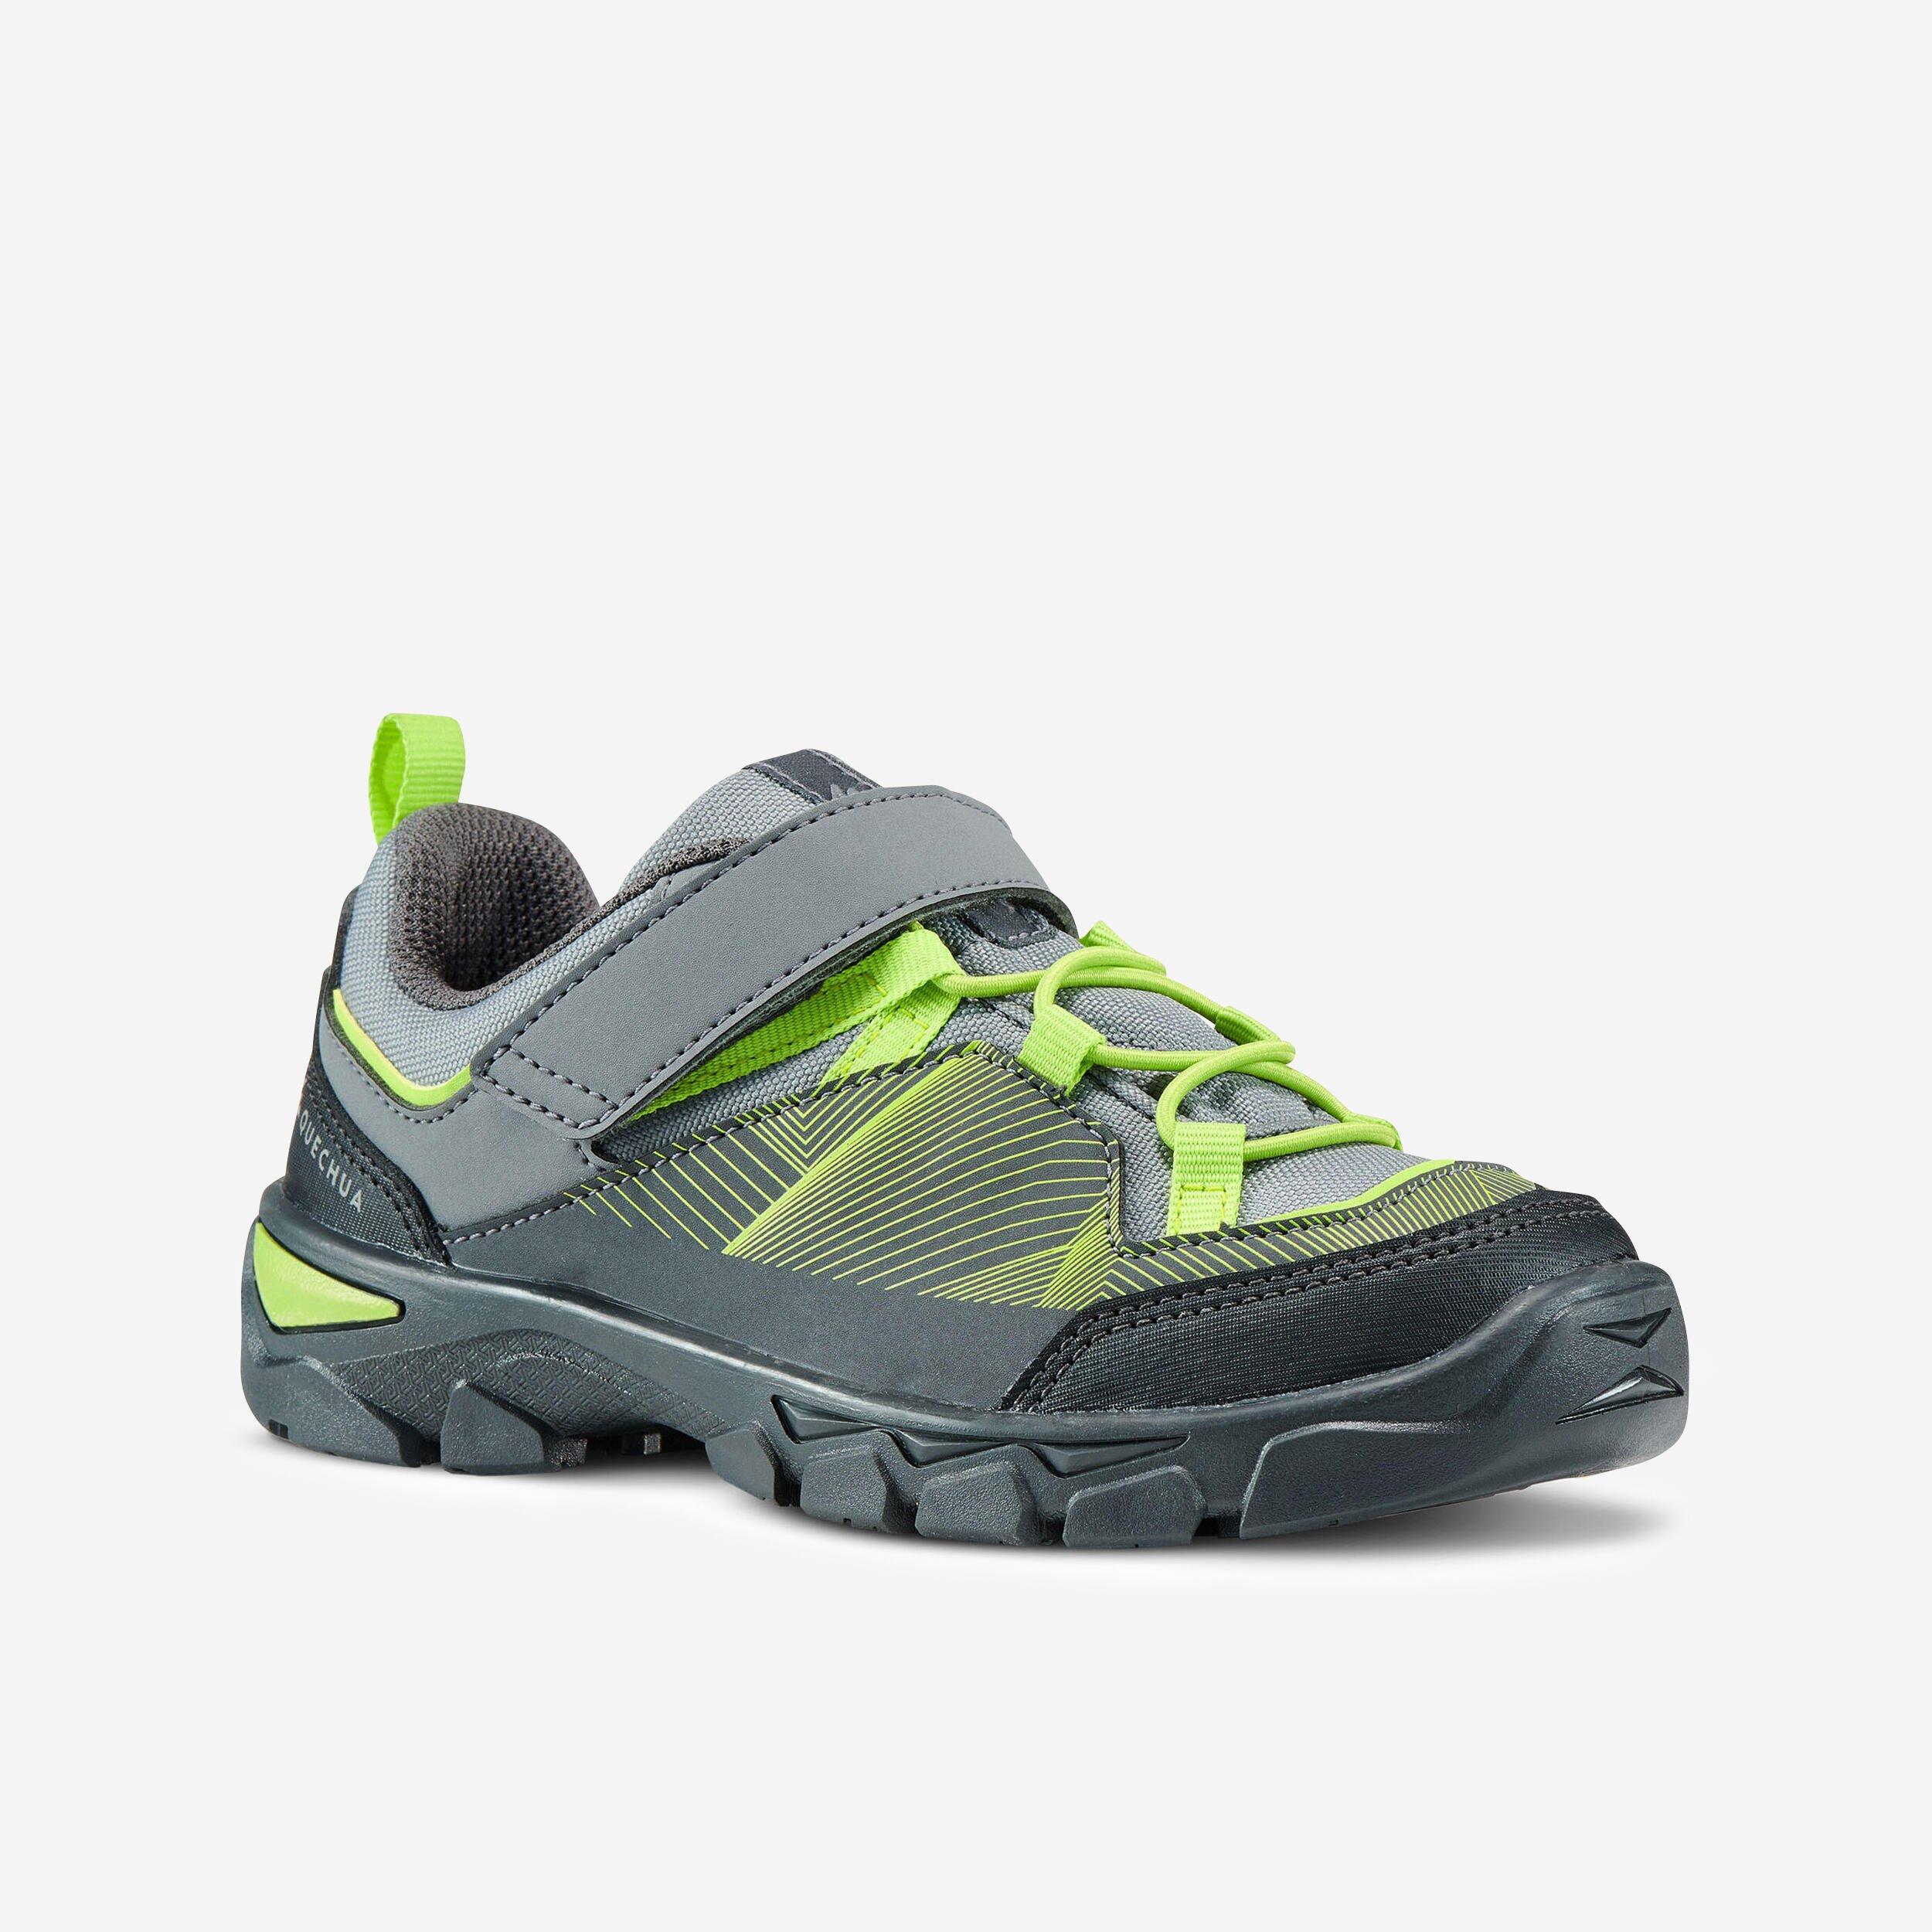 Decathlon Kids’ Velcro Hiking Shoes Mh120 Low 28 To 34